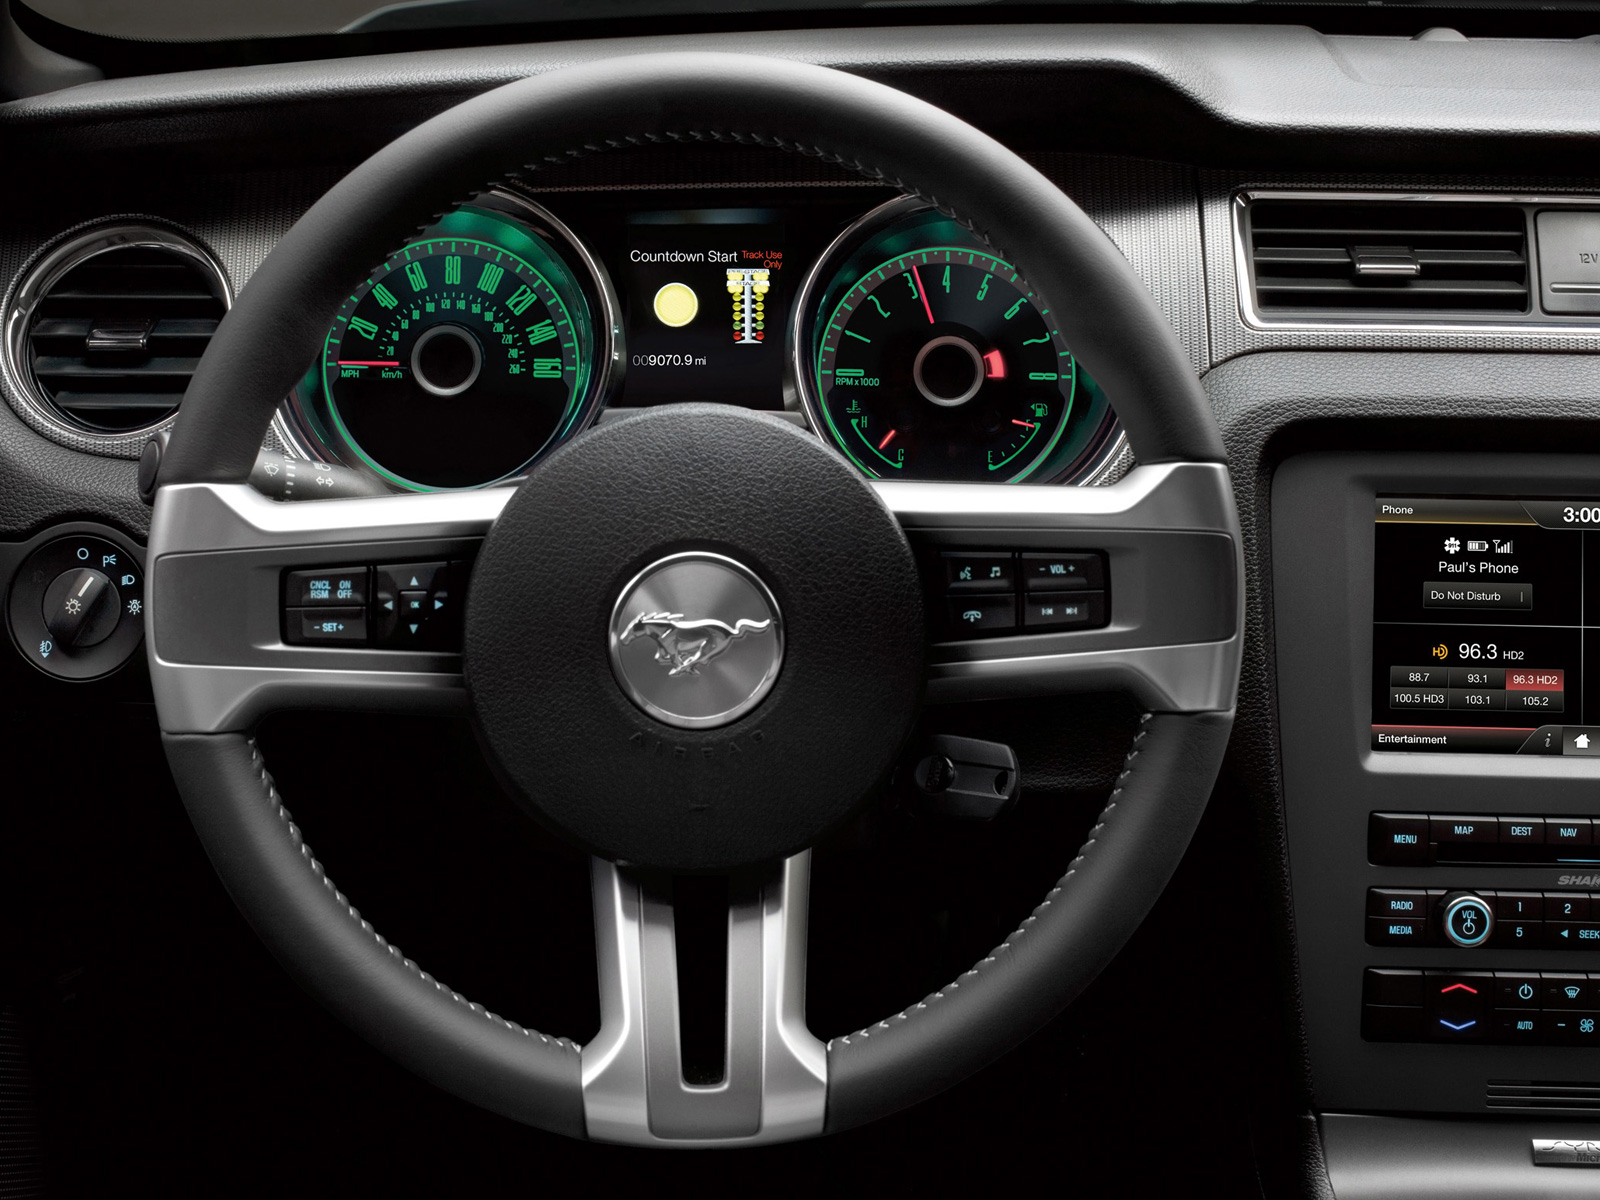 2014 Ford Mustang Interior Dashboard